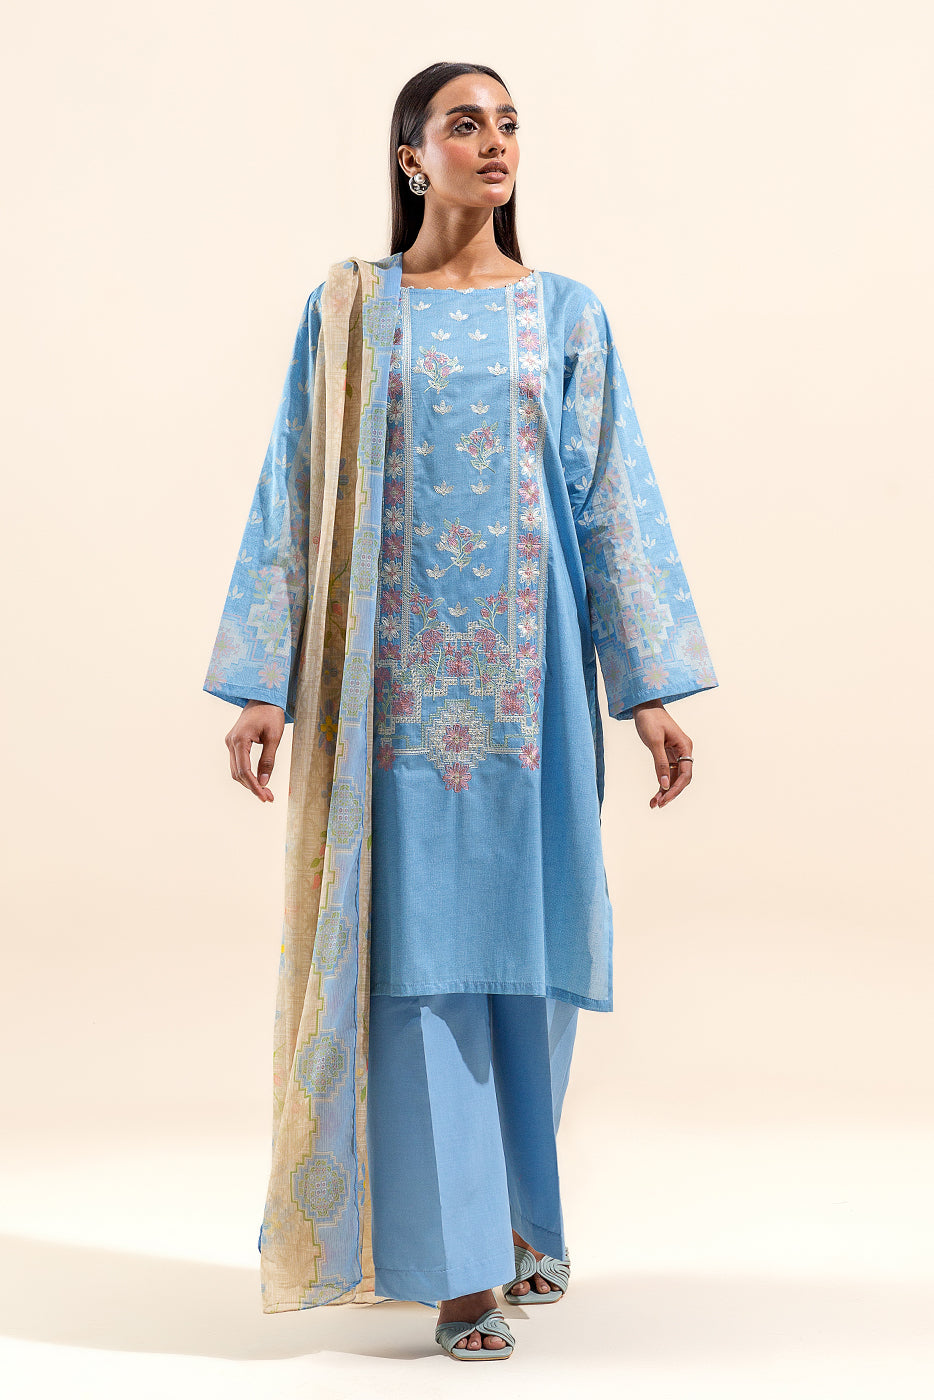 3 PIECE EMBROIDERED LAWN SUIT-TIFFANY TWIST (UNSTITCHED)